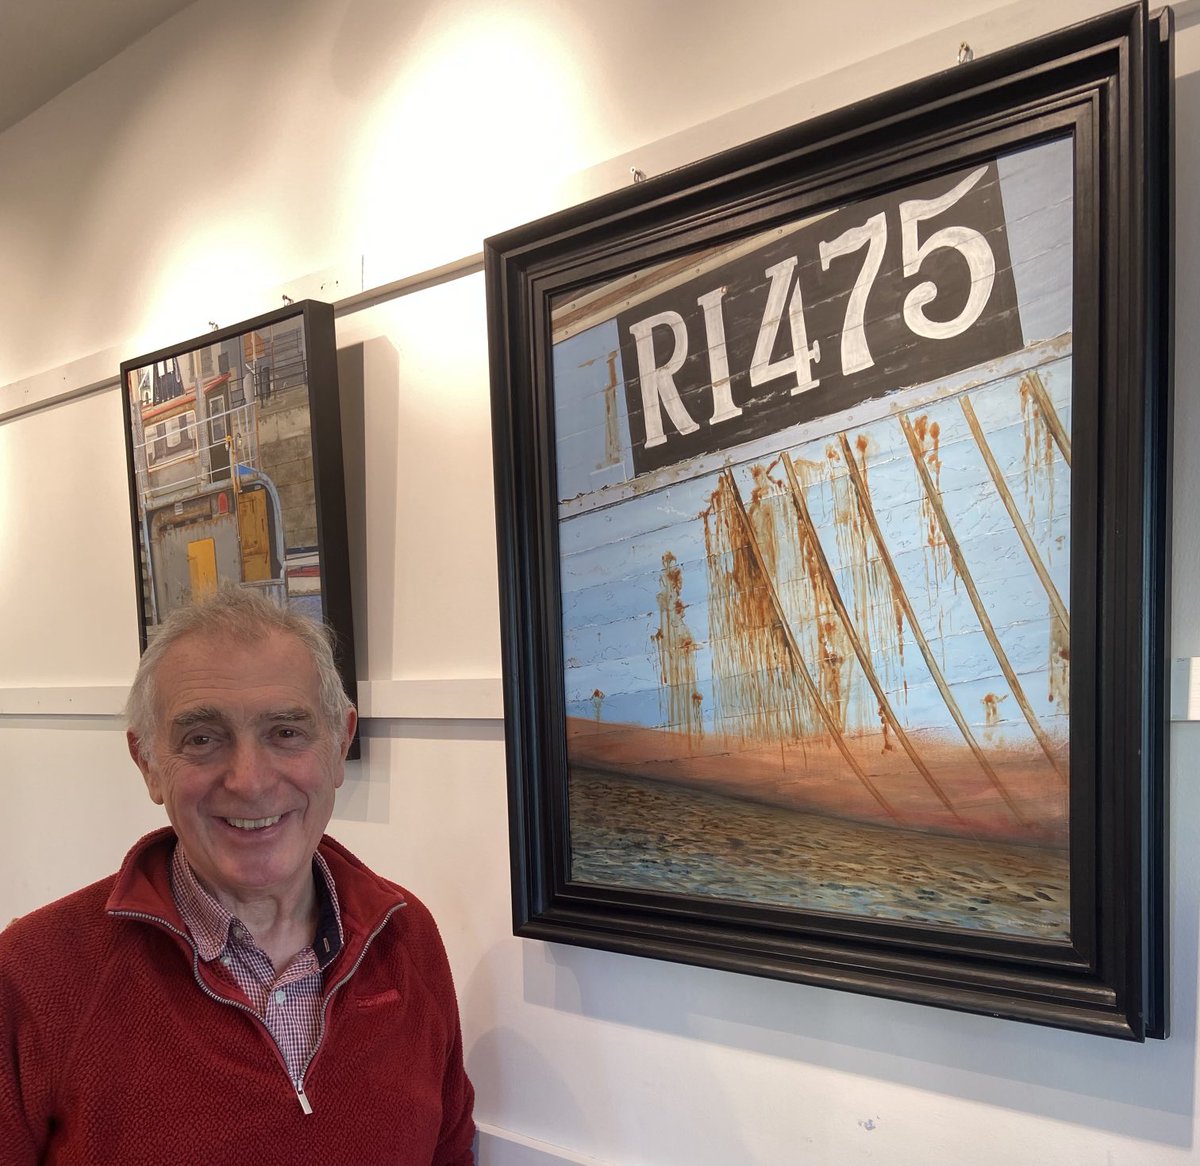 Sunday 24 March 1-3 the talented Simon Wallace is painting in the gallery alongside his current stunning exhibition of Solway inspired art #MaryportHarbour #SolwayCoast #WestCumbria #TrawlerLife #ShippingBrowGallery